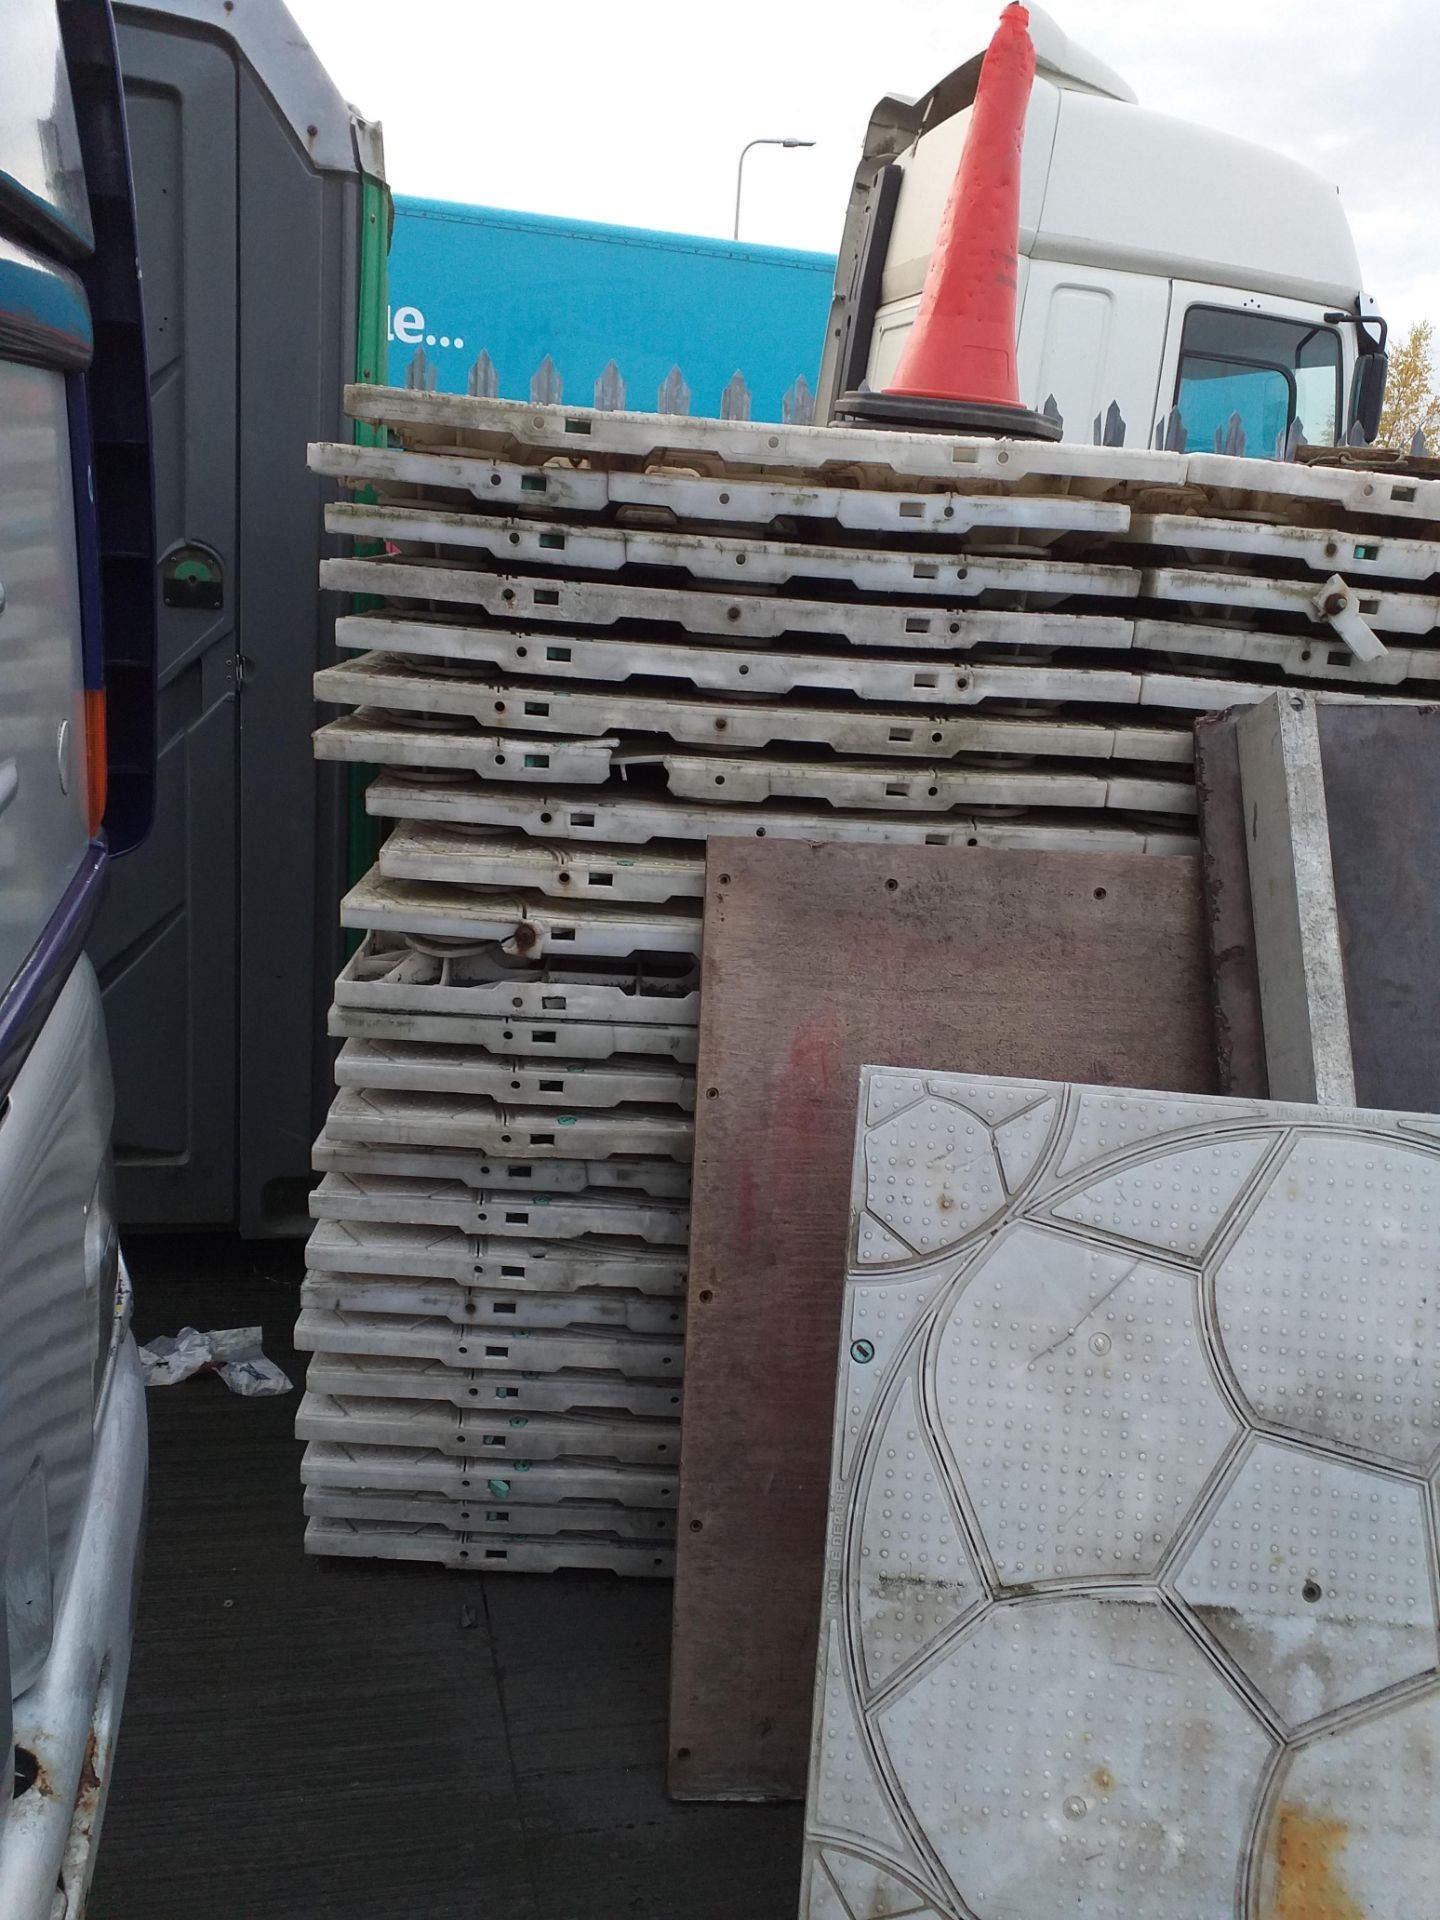 Joblot of 20 x 1m by 1m Square Temporary Outside Flooring - Image 2 of 5